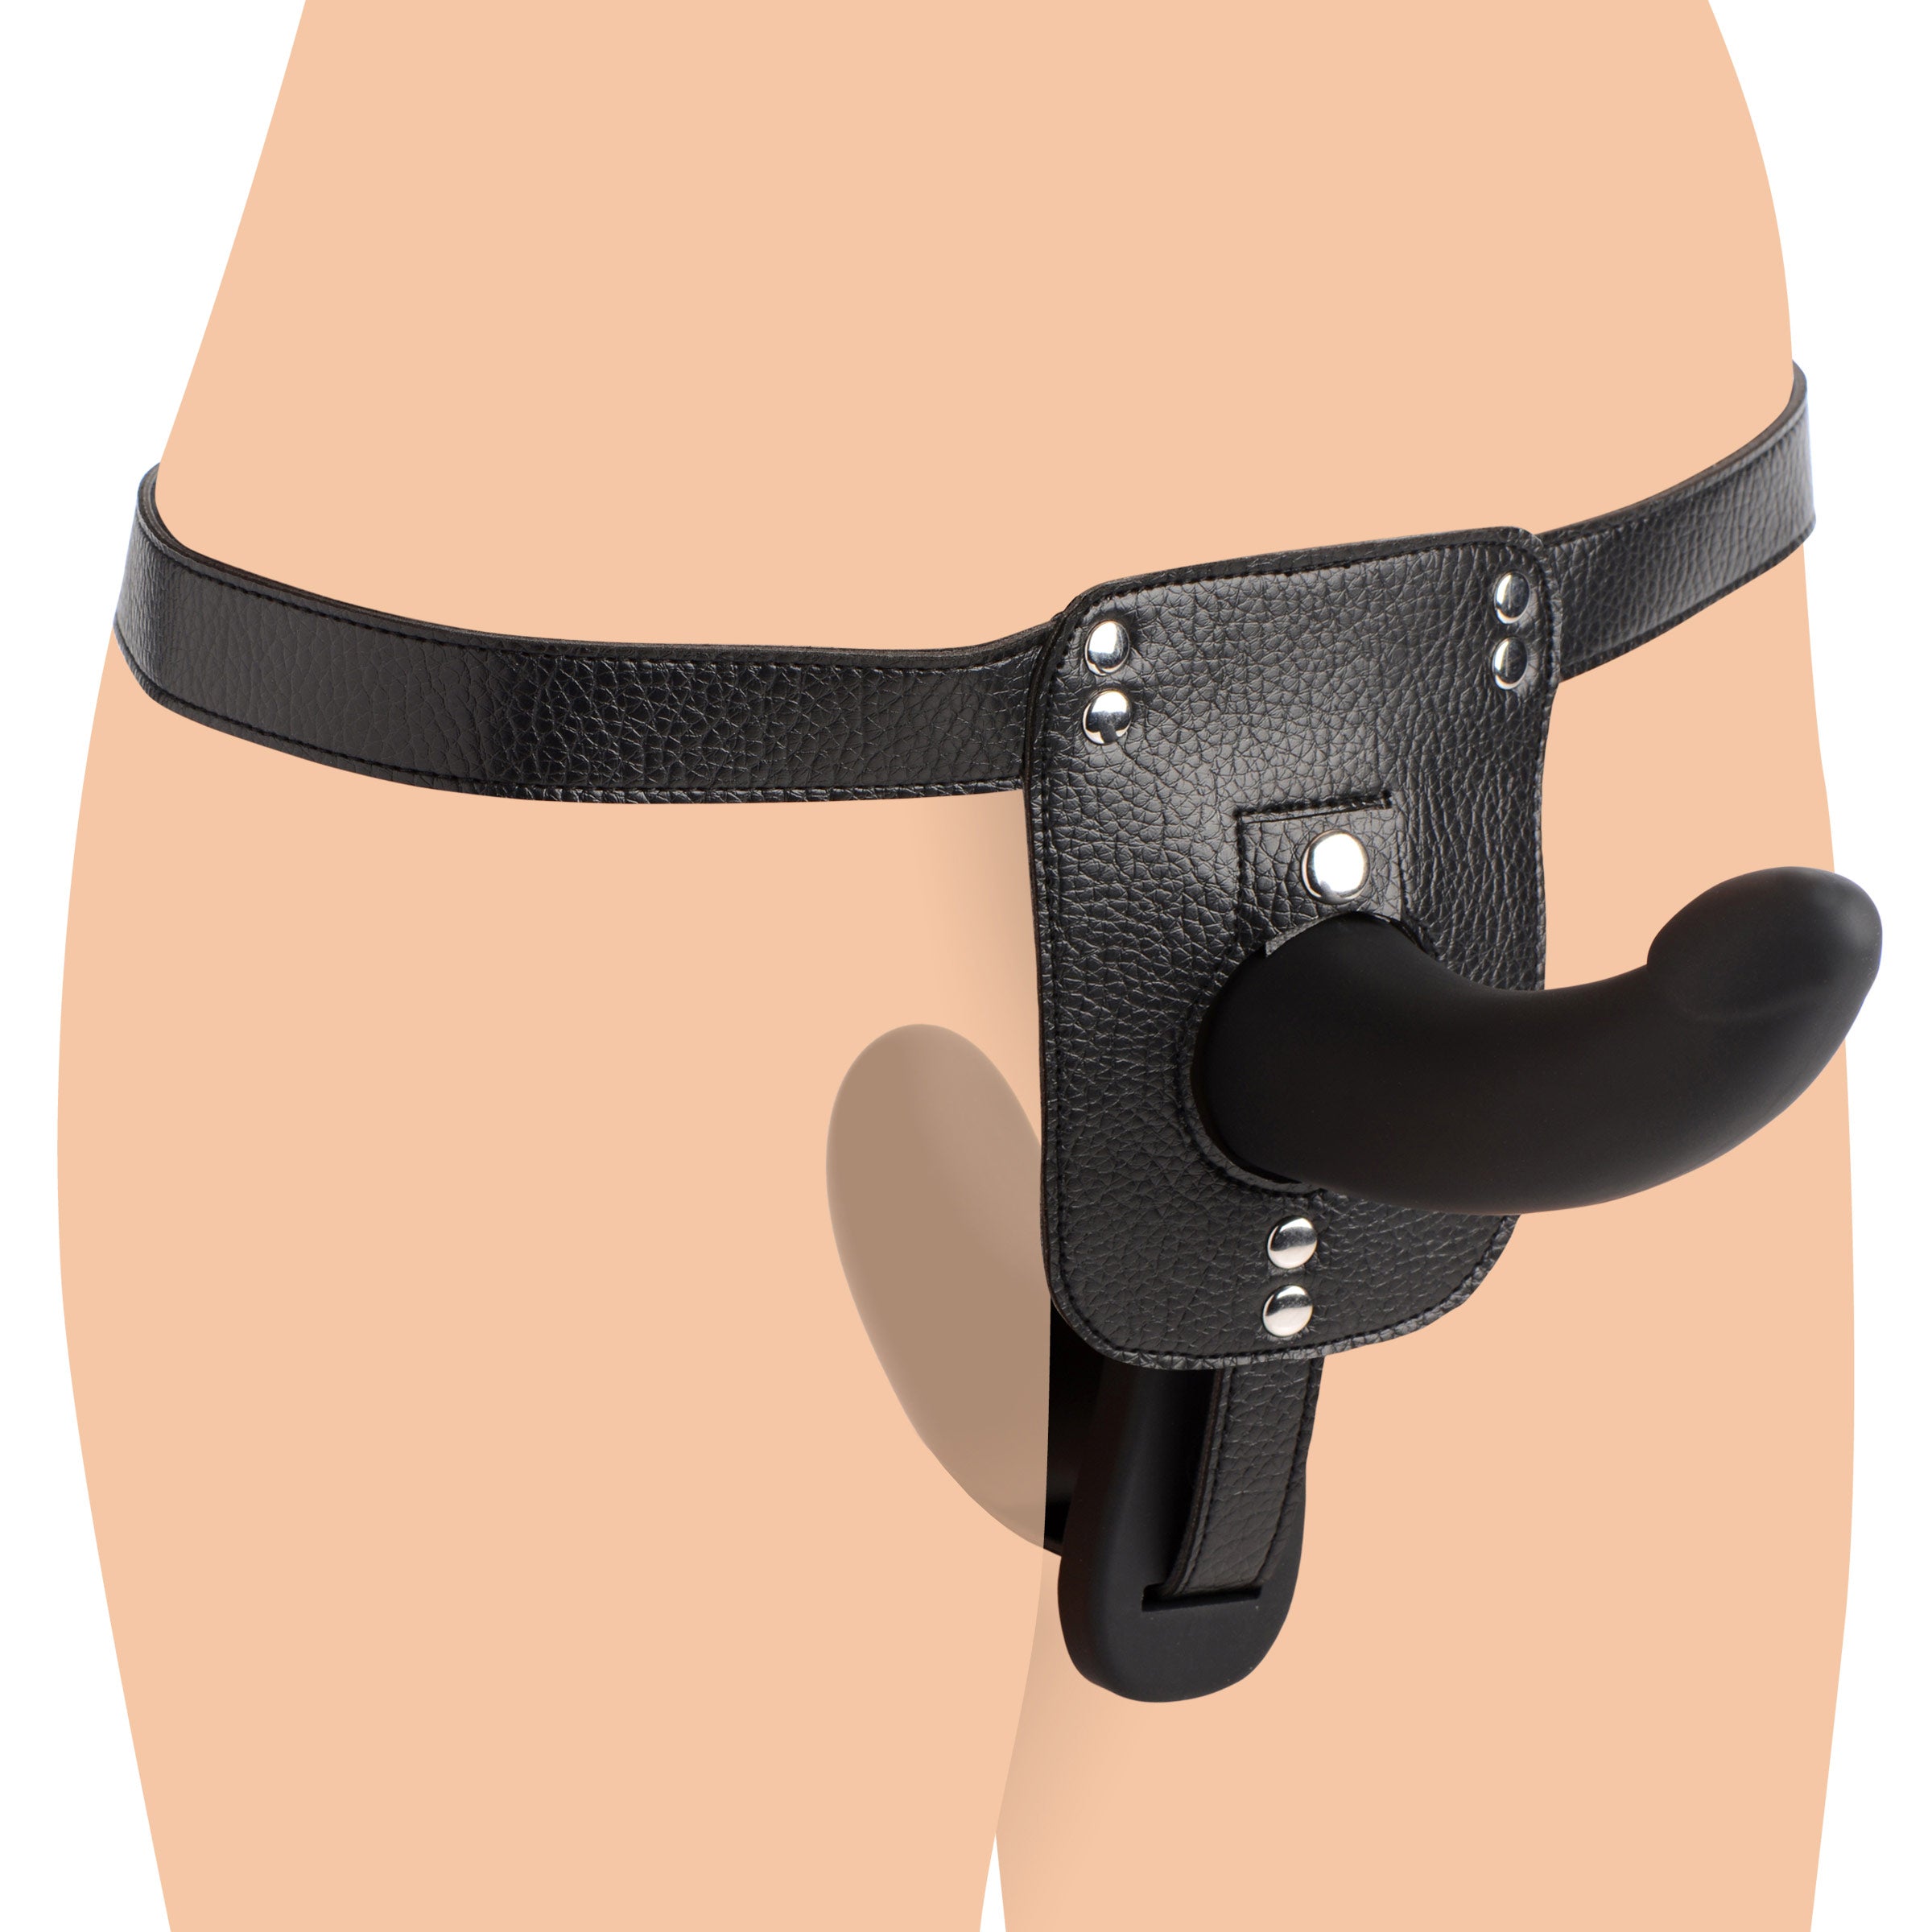 Double Take 10X Double Penetration Vibrating Strap-on Harness picture